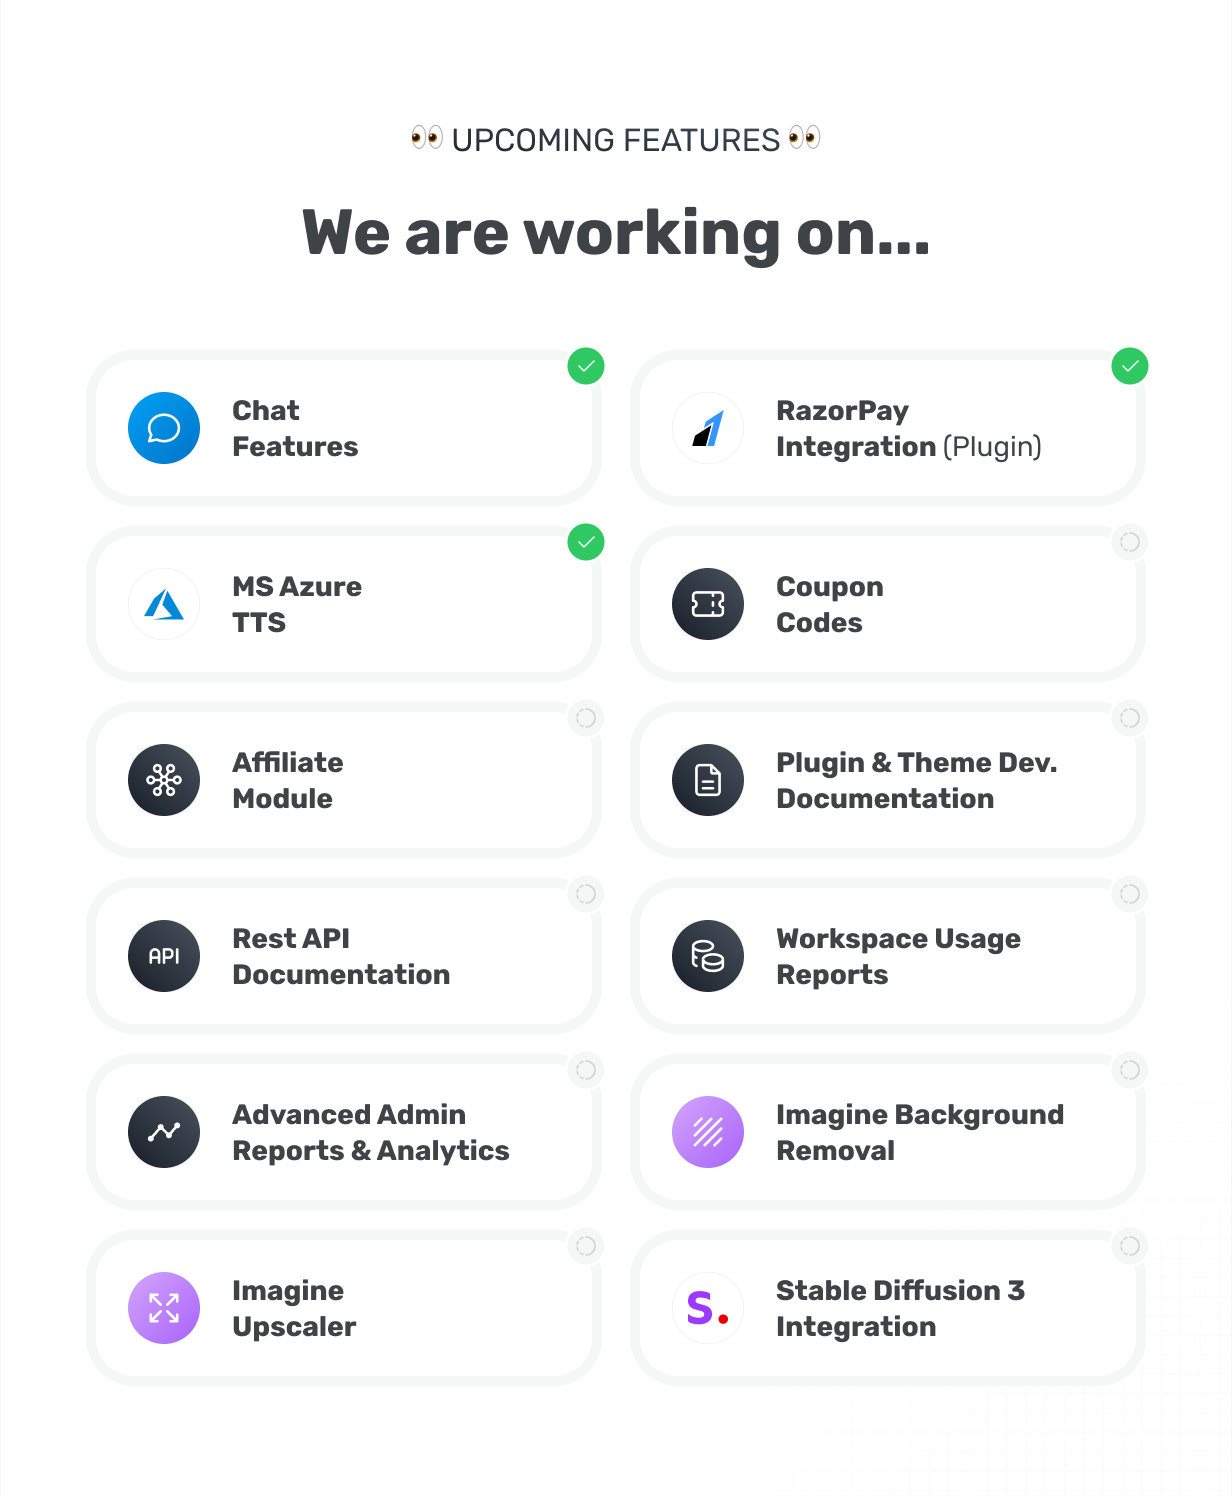 Upcoming Features We're working on... RazorPay, Coupon Codes, Affiliate Module, Chat Features, Rest API Documentation, Plugin & Theme Development Documentation, Advanced Admin Reports & Analytics, Workspace Usage Reports, Imagine Upscaler, Imagine Remove Background, Microsoft Azure TTS, Stable Diffusion 3 Integration @heyaikeedo [HASH=13823]#aikeedo[/HASH]